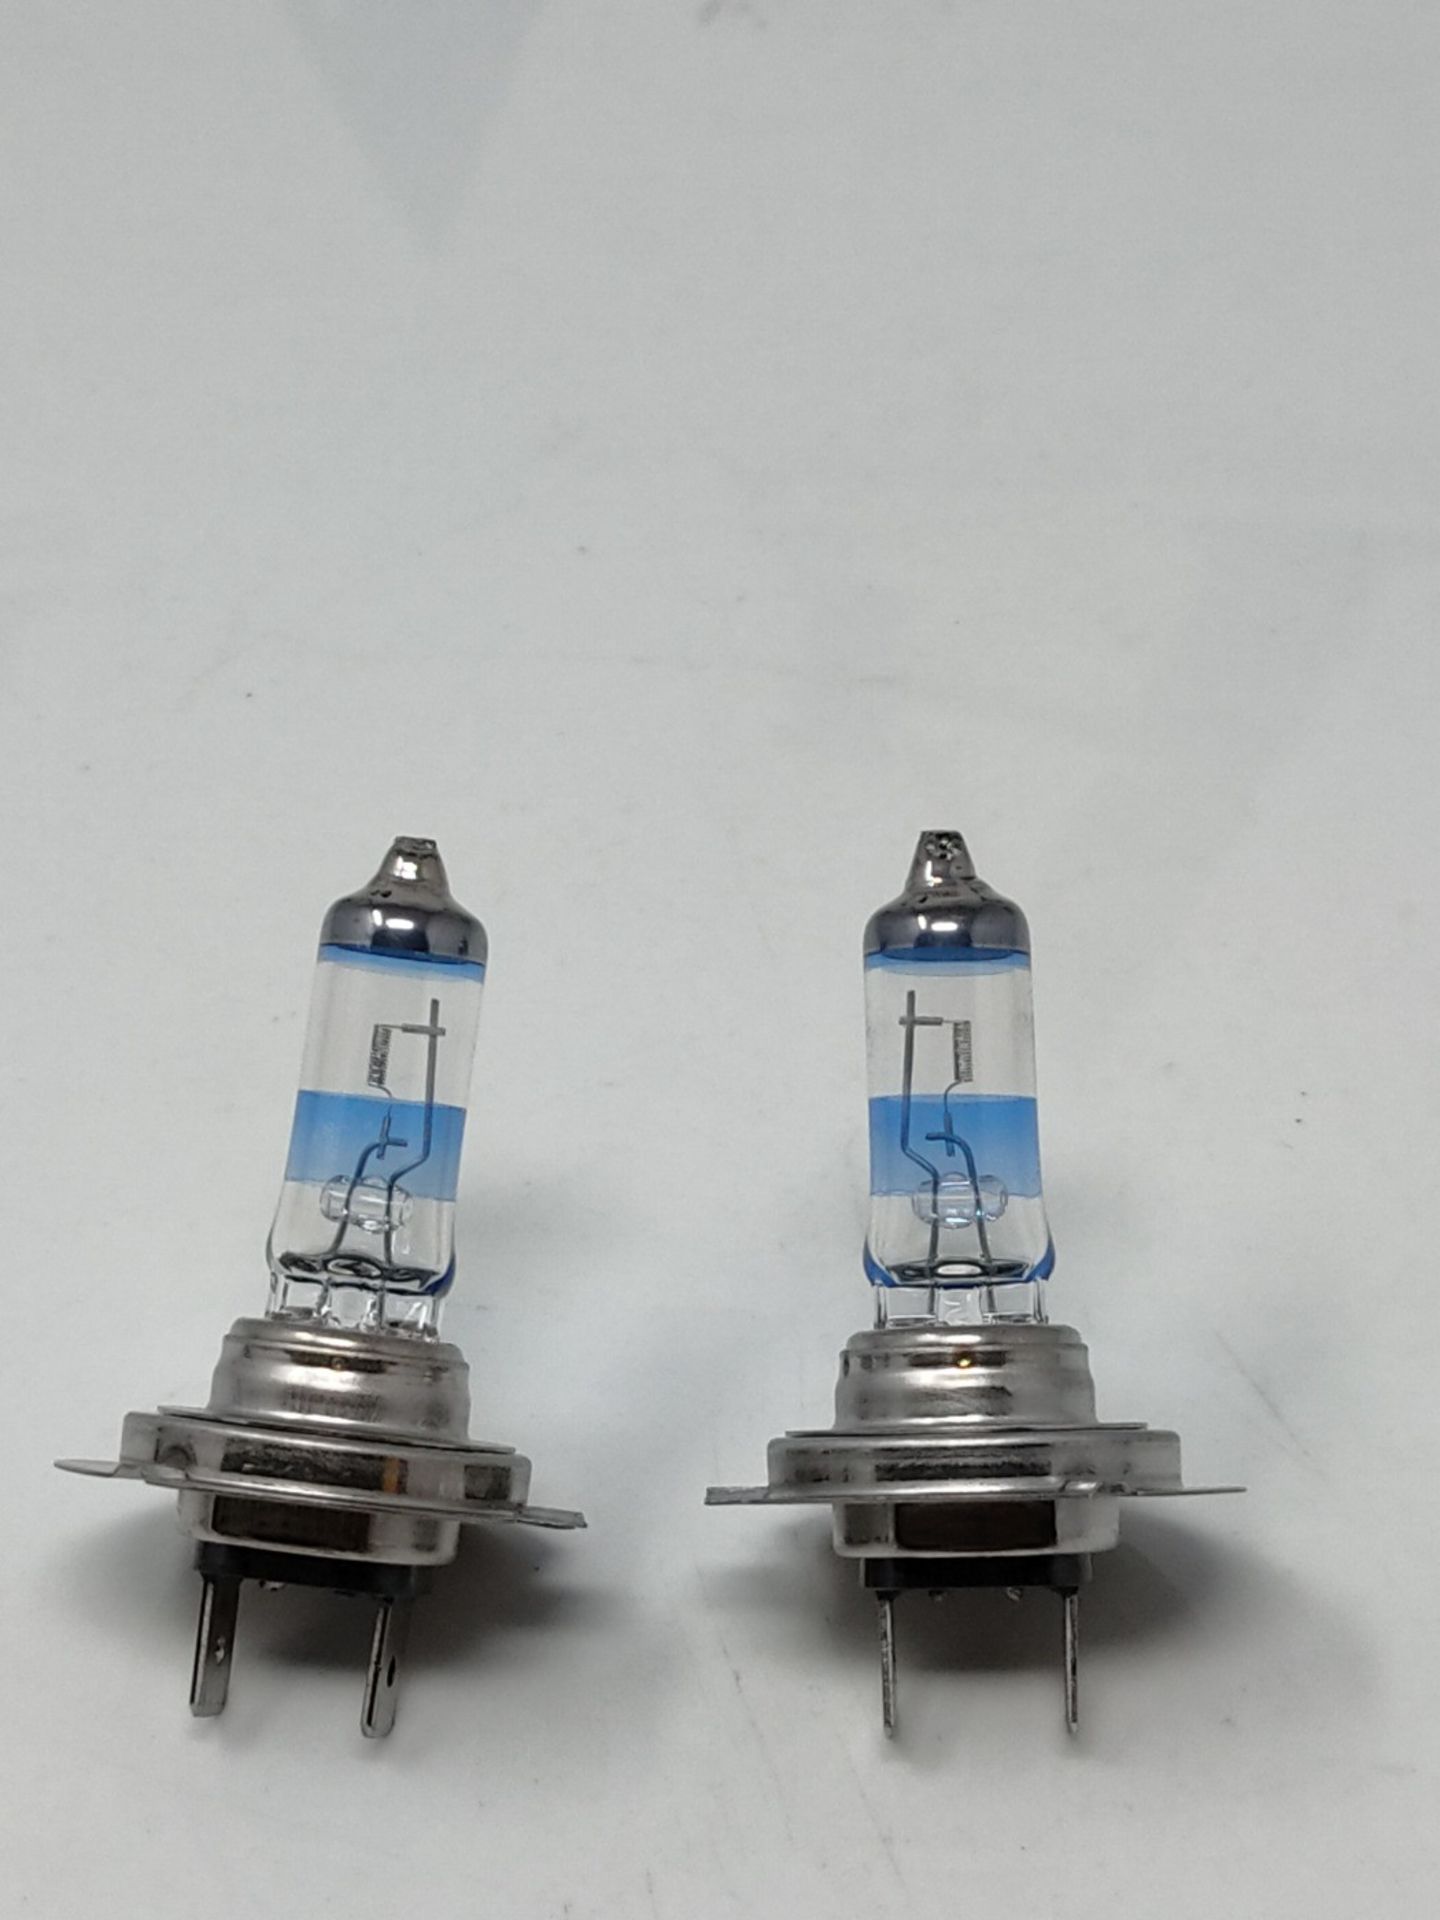 Philips Racing Vision GT200 H7 Car Headlight Bulb +200 Percent, Set of 2 - Image 3 of 3